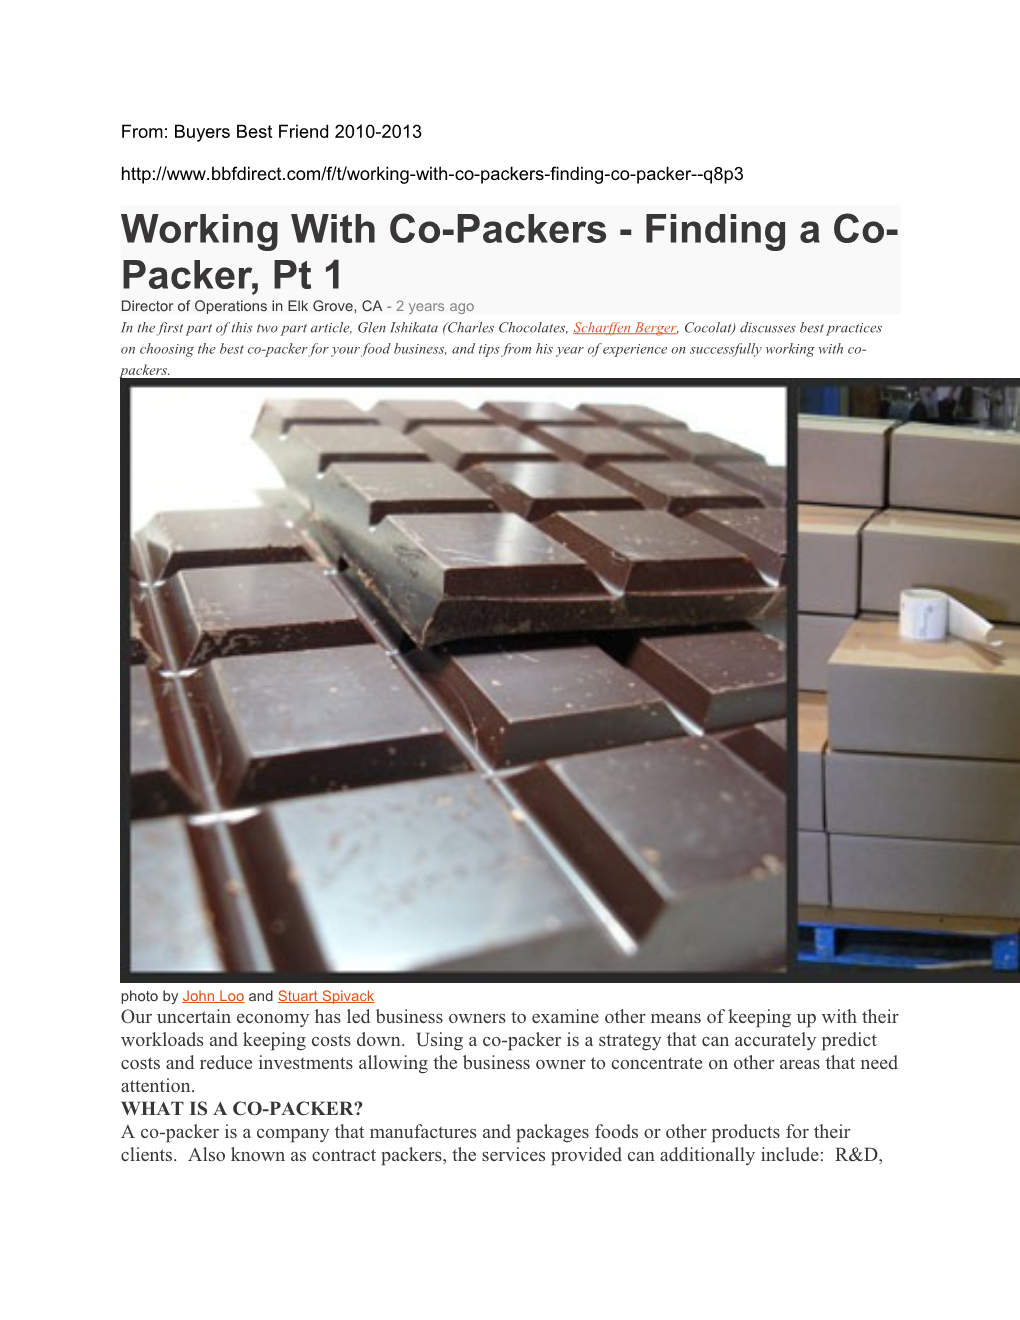 Working with Co-Packers - Finding a Co-Packer, Pt 1